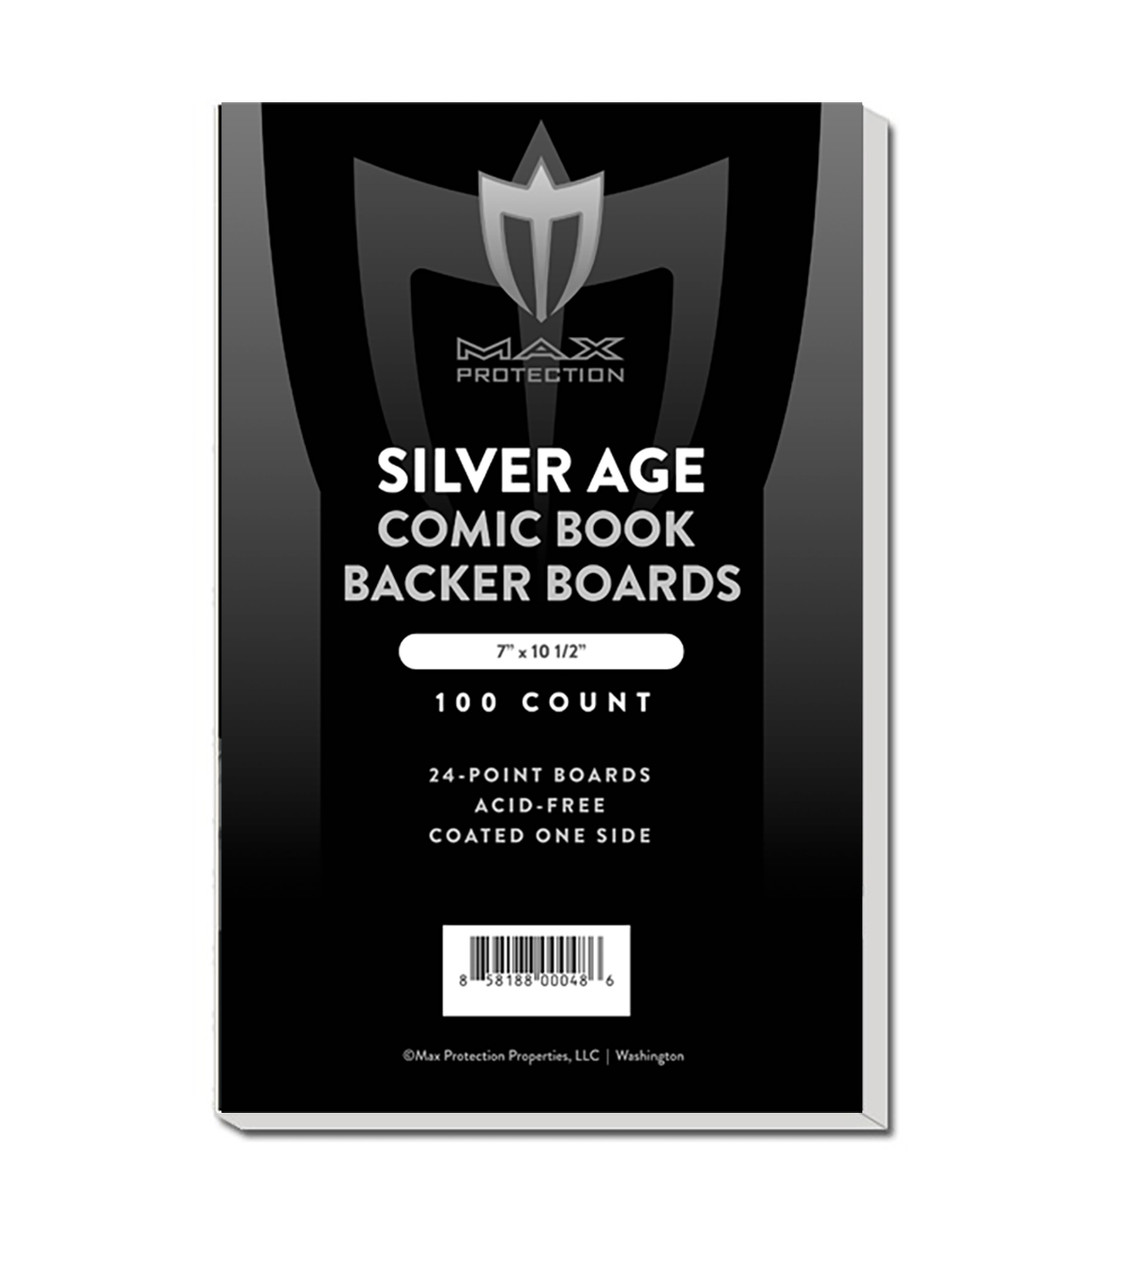  BCW Silver Age Comic Bags and Backer Boards - 200 ct